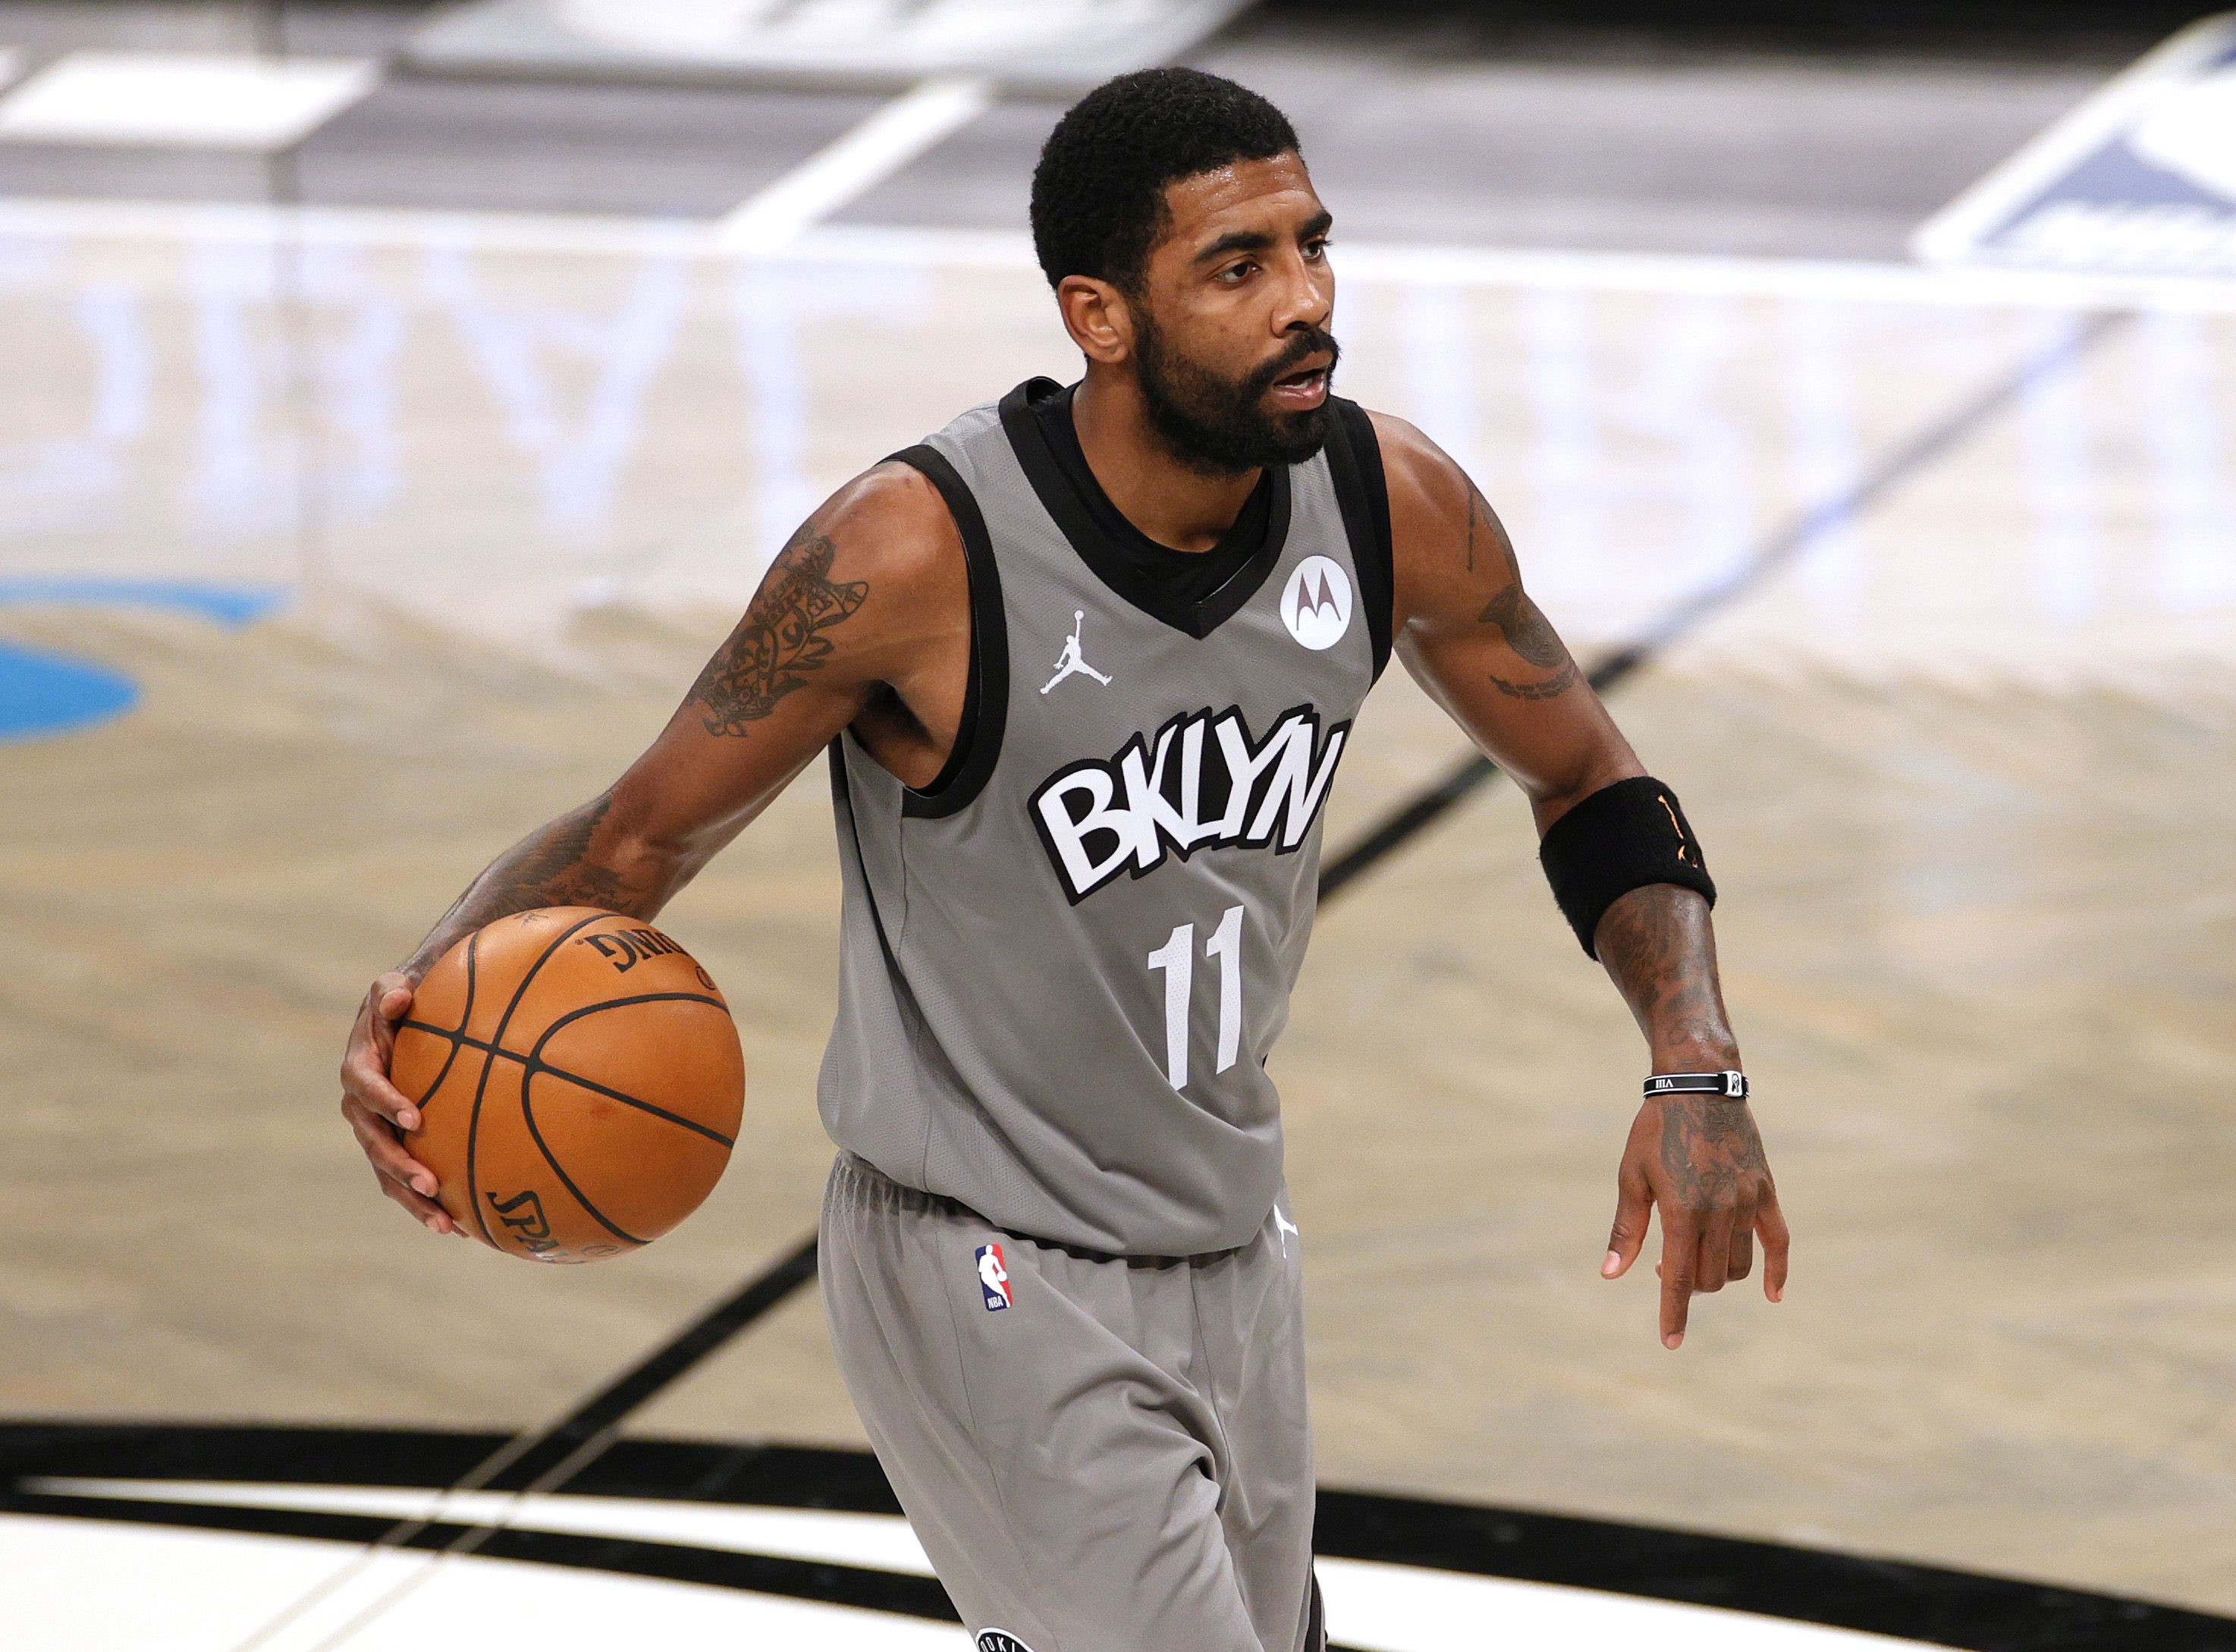 Kyrie Irving rejoins Nets, says he 'just needed a pause' - WISH-TV